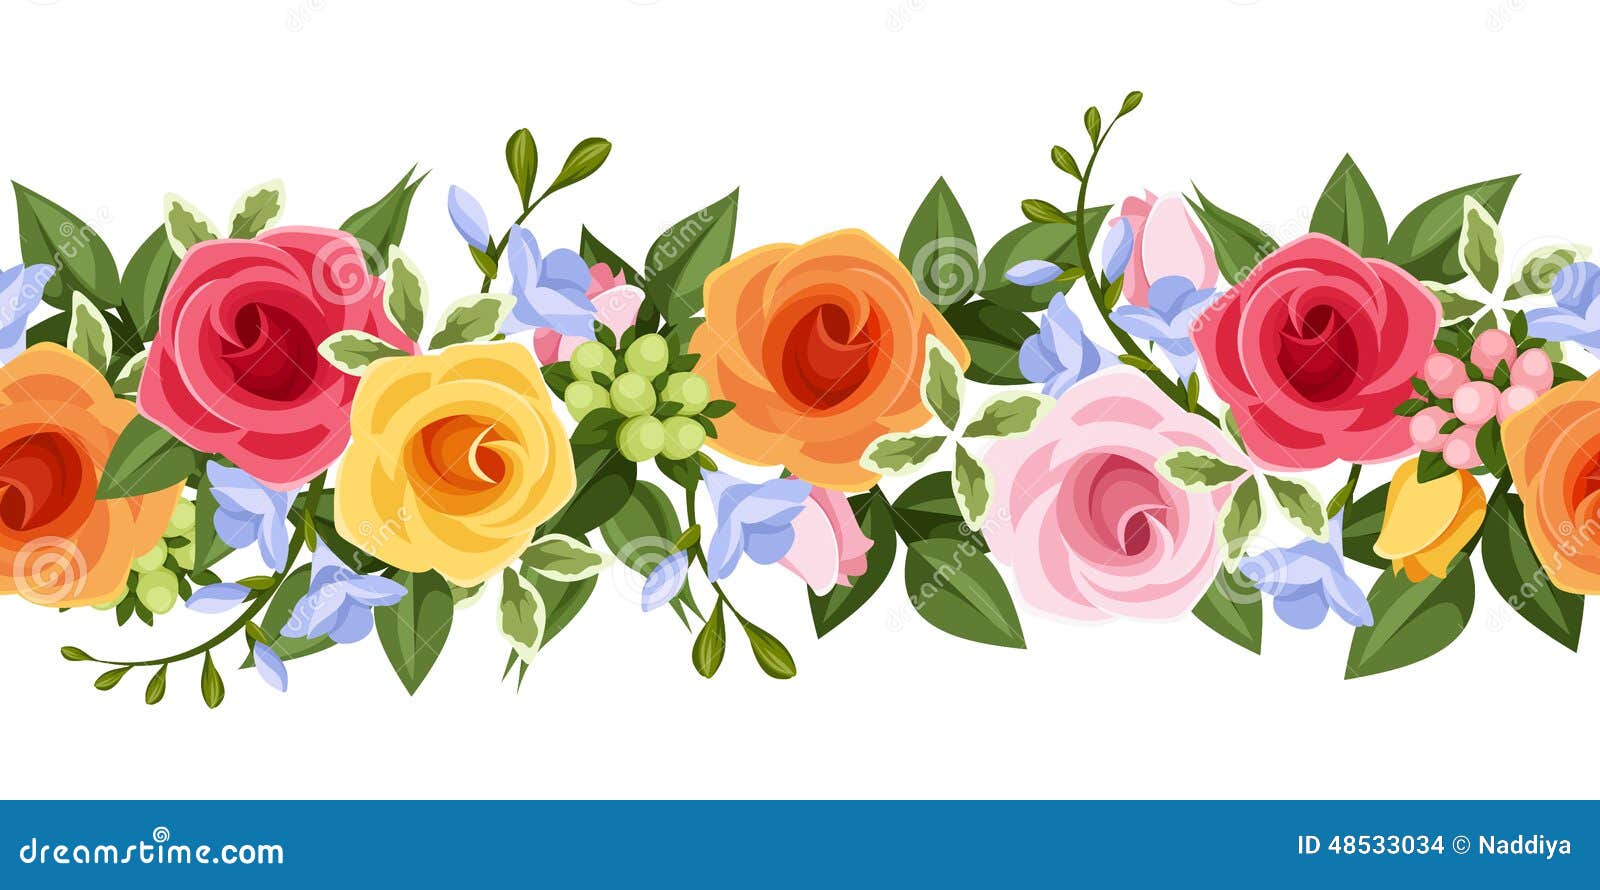 horizontal seamless background with colorful roses and freesia flowers.  .